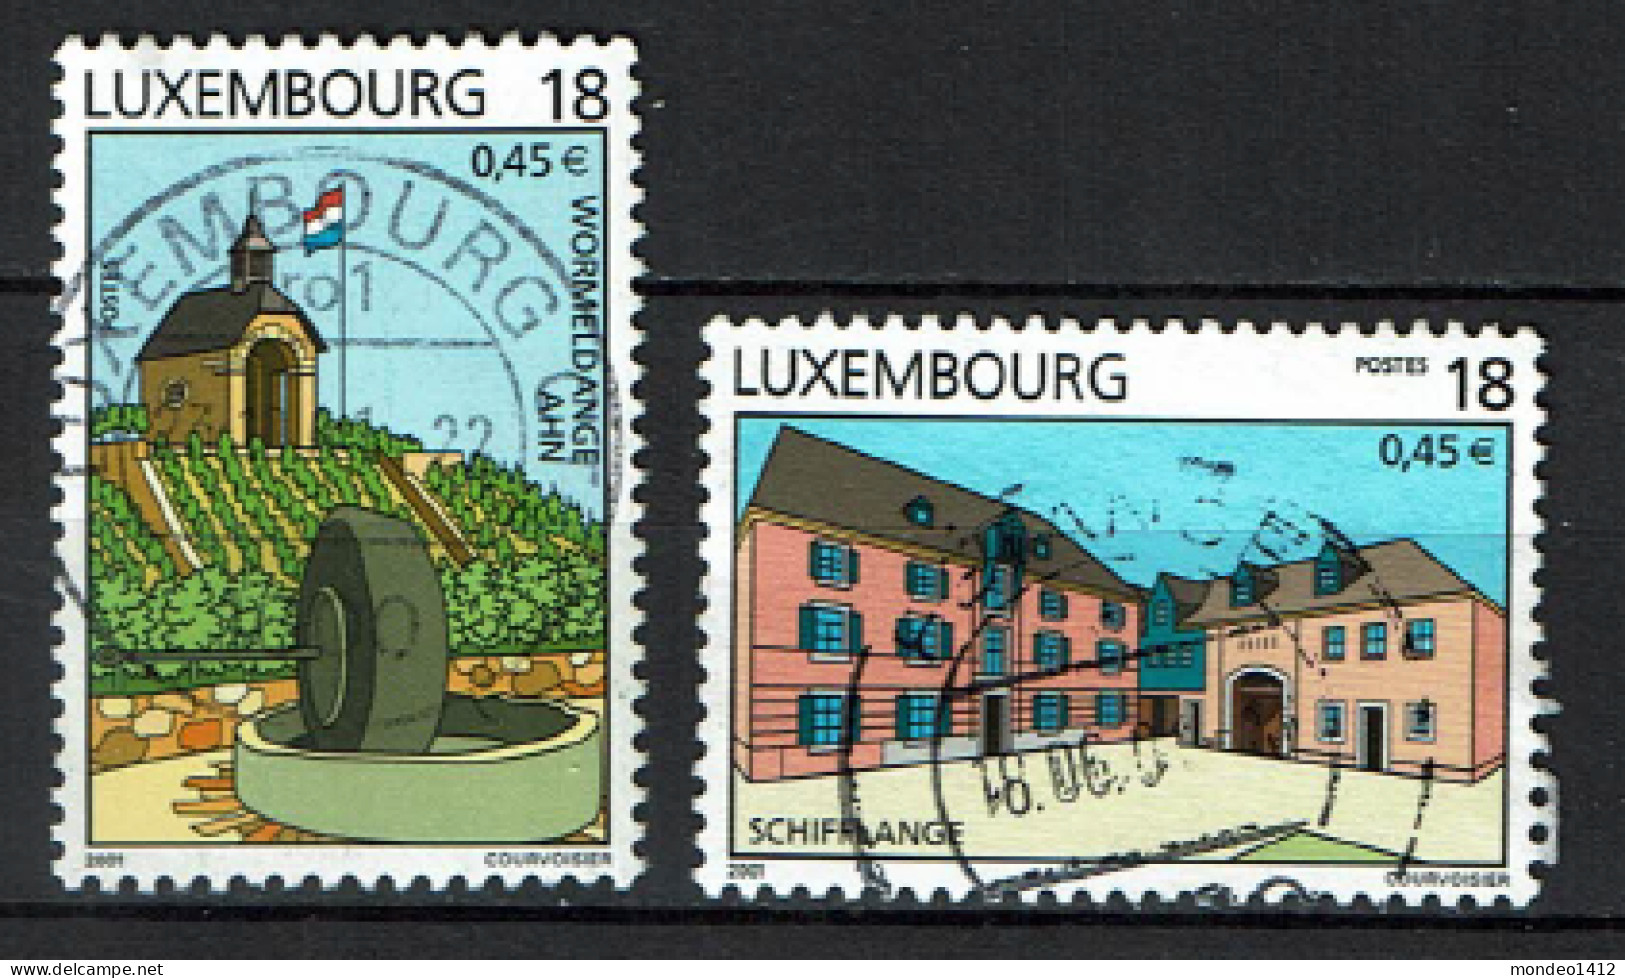 Luxembourg 2001 - YT 1477/1478 - Touristique, Tourist Attractions - Schifflange, Wormeldange-Ahn - Used Stamps